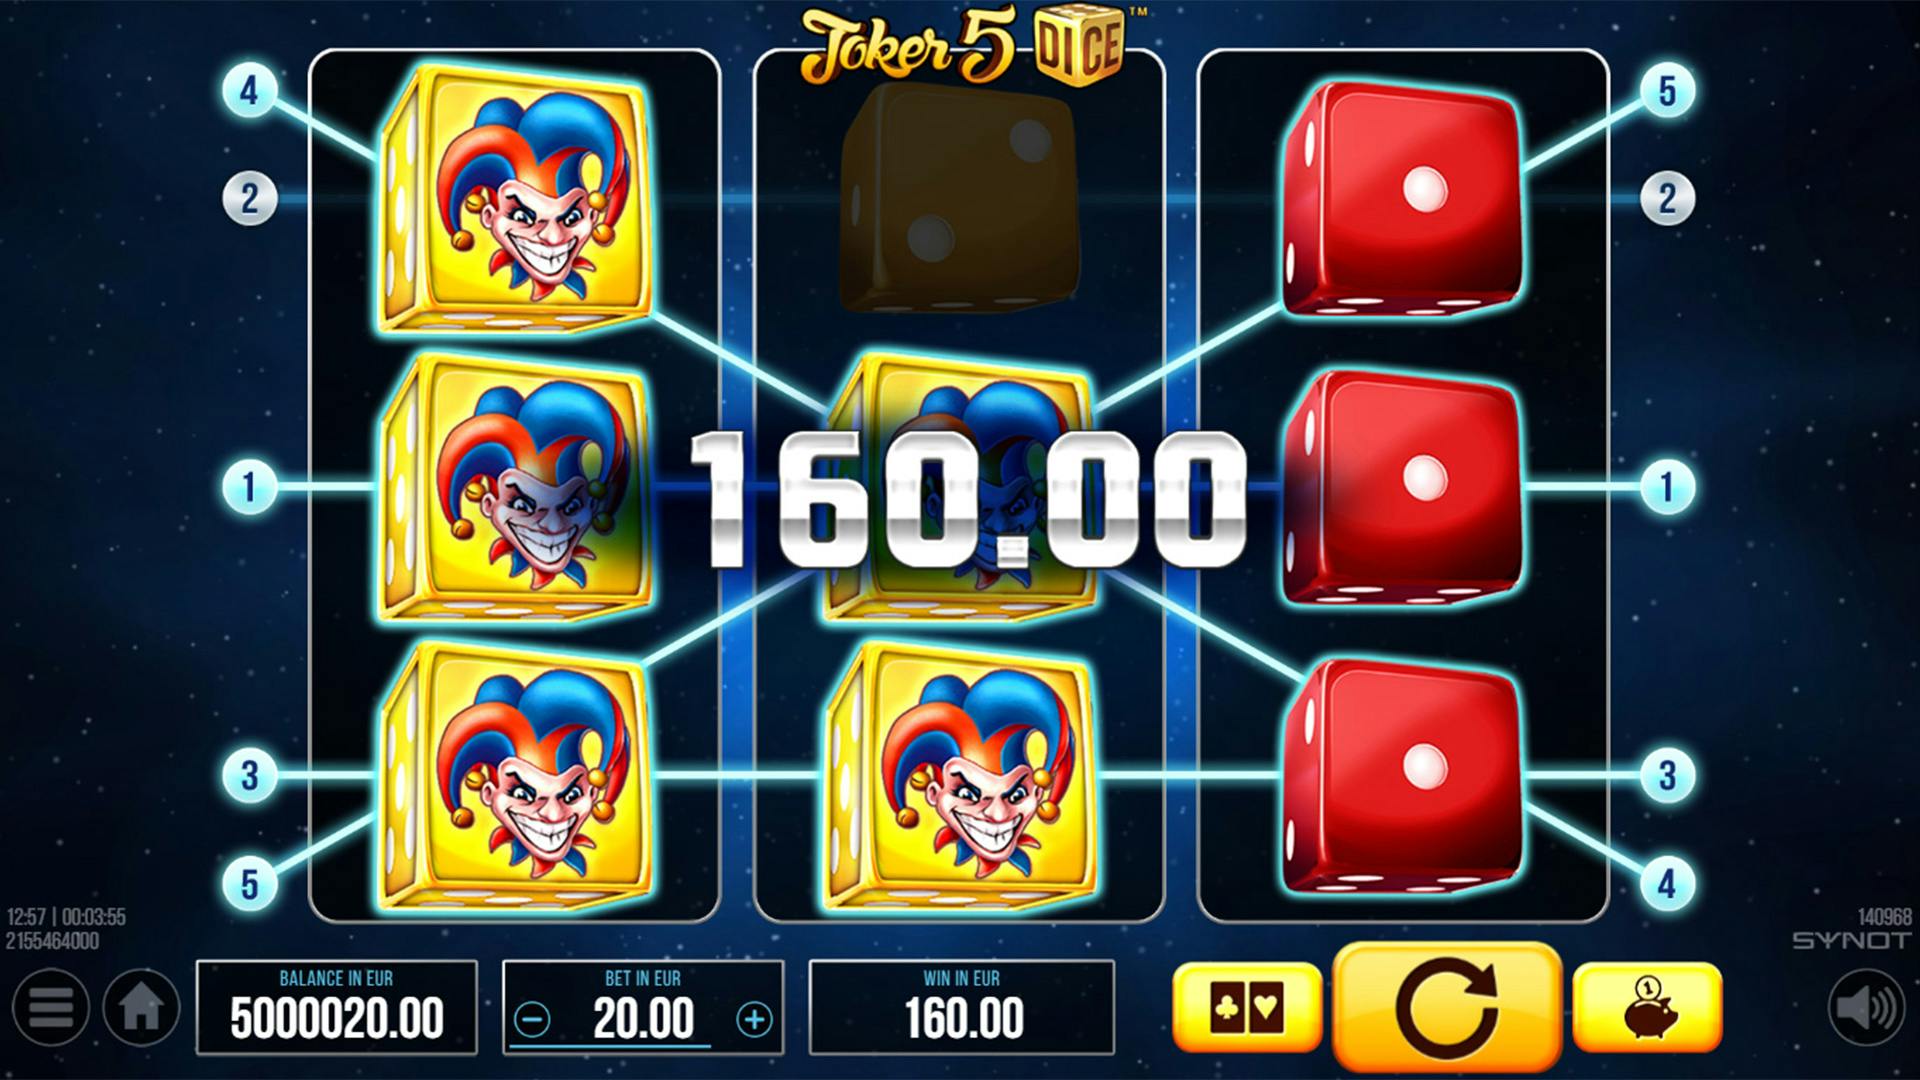 Review of Synot Joker 5 Dice dice slot game